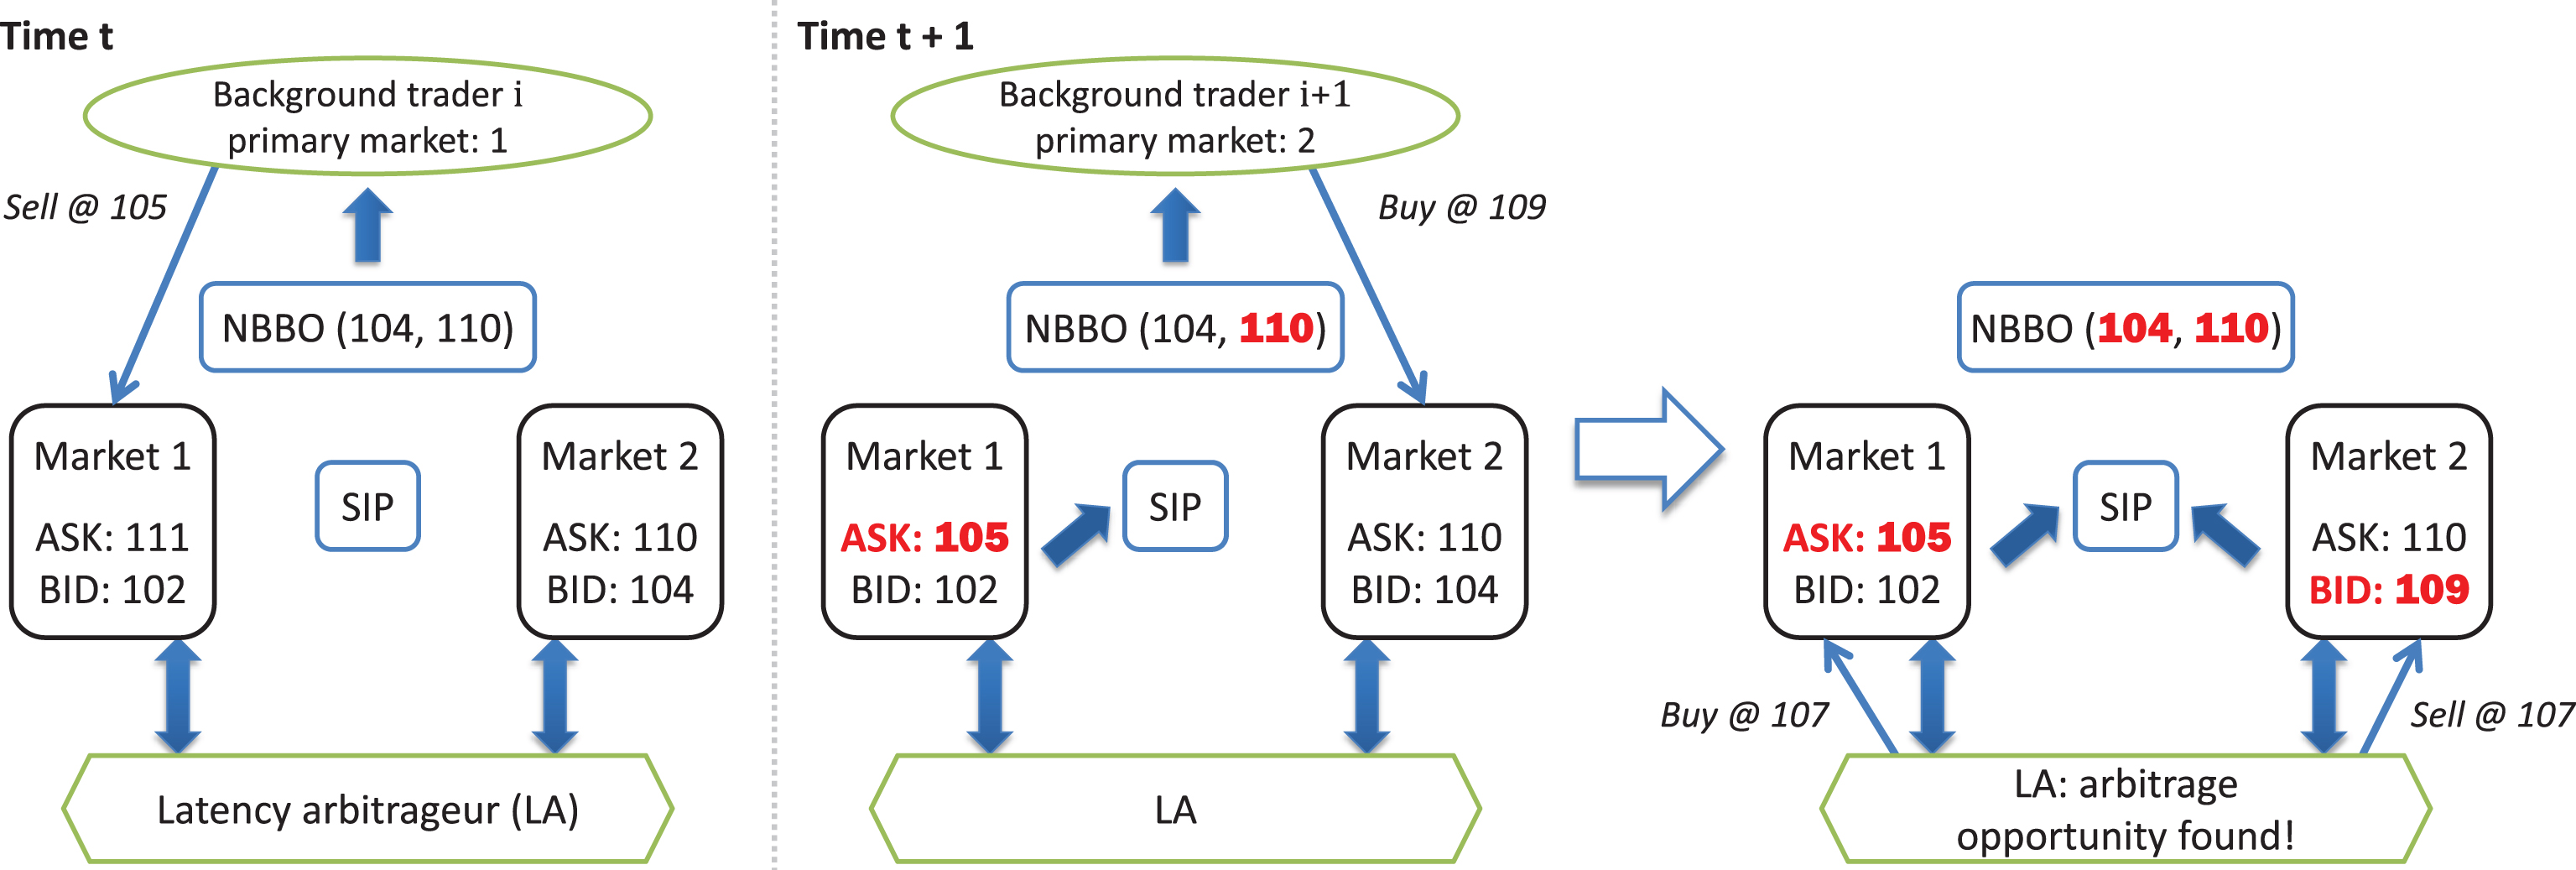 Emergence of a latency arbitrage opportunity over two time steps in the two-market model.
 All orders are for single-unit quantities. 
A red, bolded price highlights a discrepancy between the actual market state and the NBBO, represented in the diagram as (BIDN, ASKN). 
At time t, the NBBO is up to date. 
Background trader i wishes to sell at price 105. 
Since BIDN < 105 (which indicates non-immediate execution), the investor’s order is routed to market 1. 
At time t + 1, the NBBO is out of date, as the SIP updates the public quote with some delay δ.
Background trader i + 1 wishes to buy at 109;
based on the NBBO, its order is routed to market 2, its primary market. 
(Had its order been routed to market 1, its bid would have transacted immediately.) 
The submission of its order to the inferior market opens up an arbitrage opportunity between the two markets (BID2 > ASK1), which LA immediately exploits for a guaranteed profit.